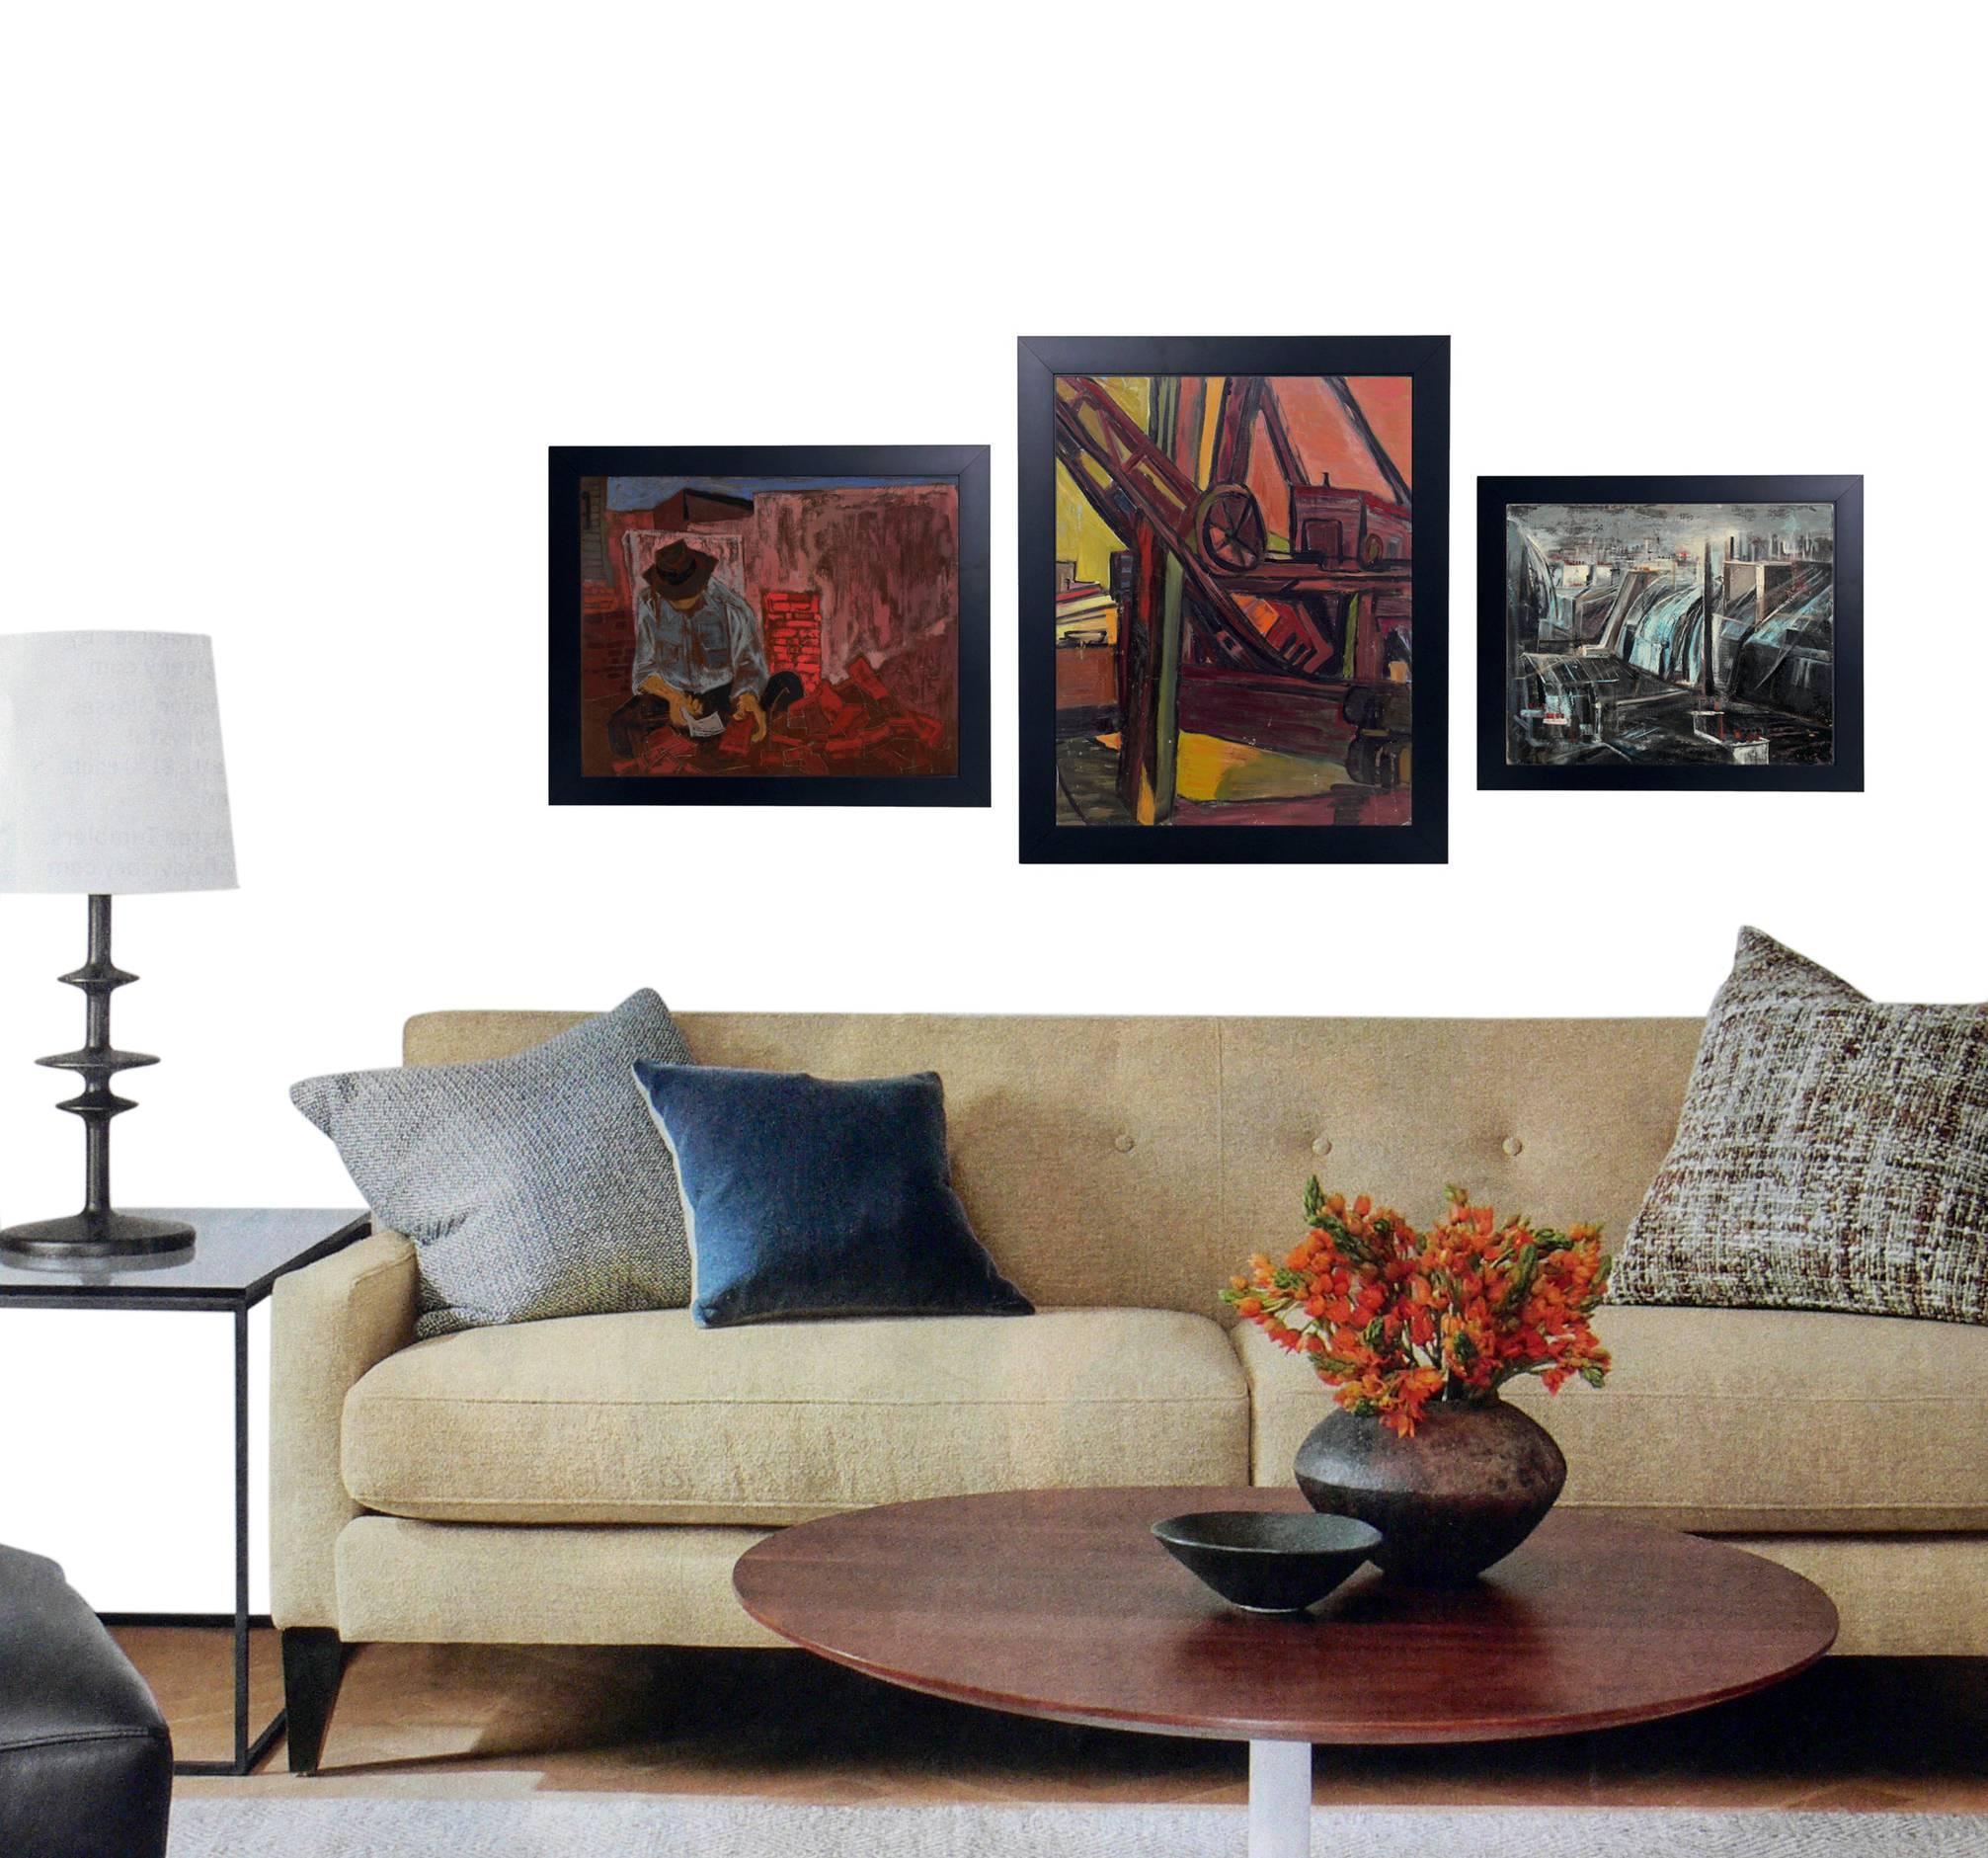 Group of Three WPA Era Paintings, American, circa 1930s-1950s. 
From left to right, they are:
1) Brick mason oil painting, American, circa 1930s. It measures 23.5